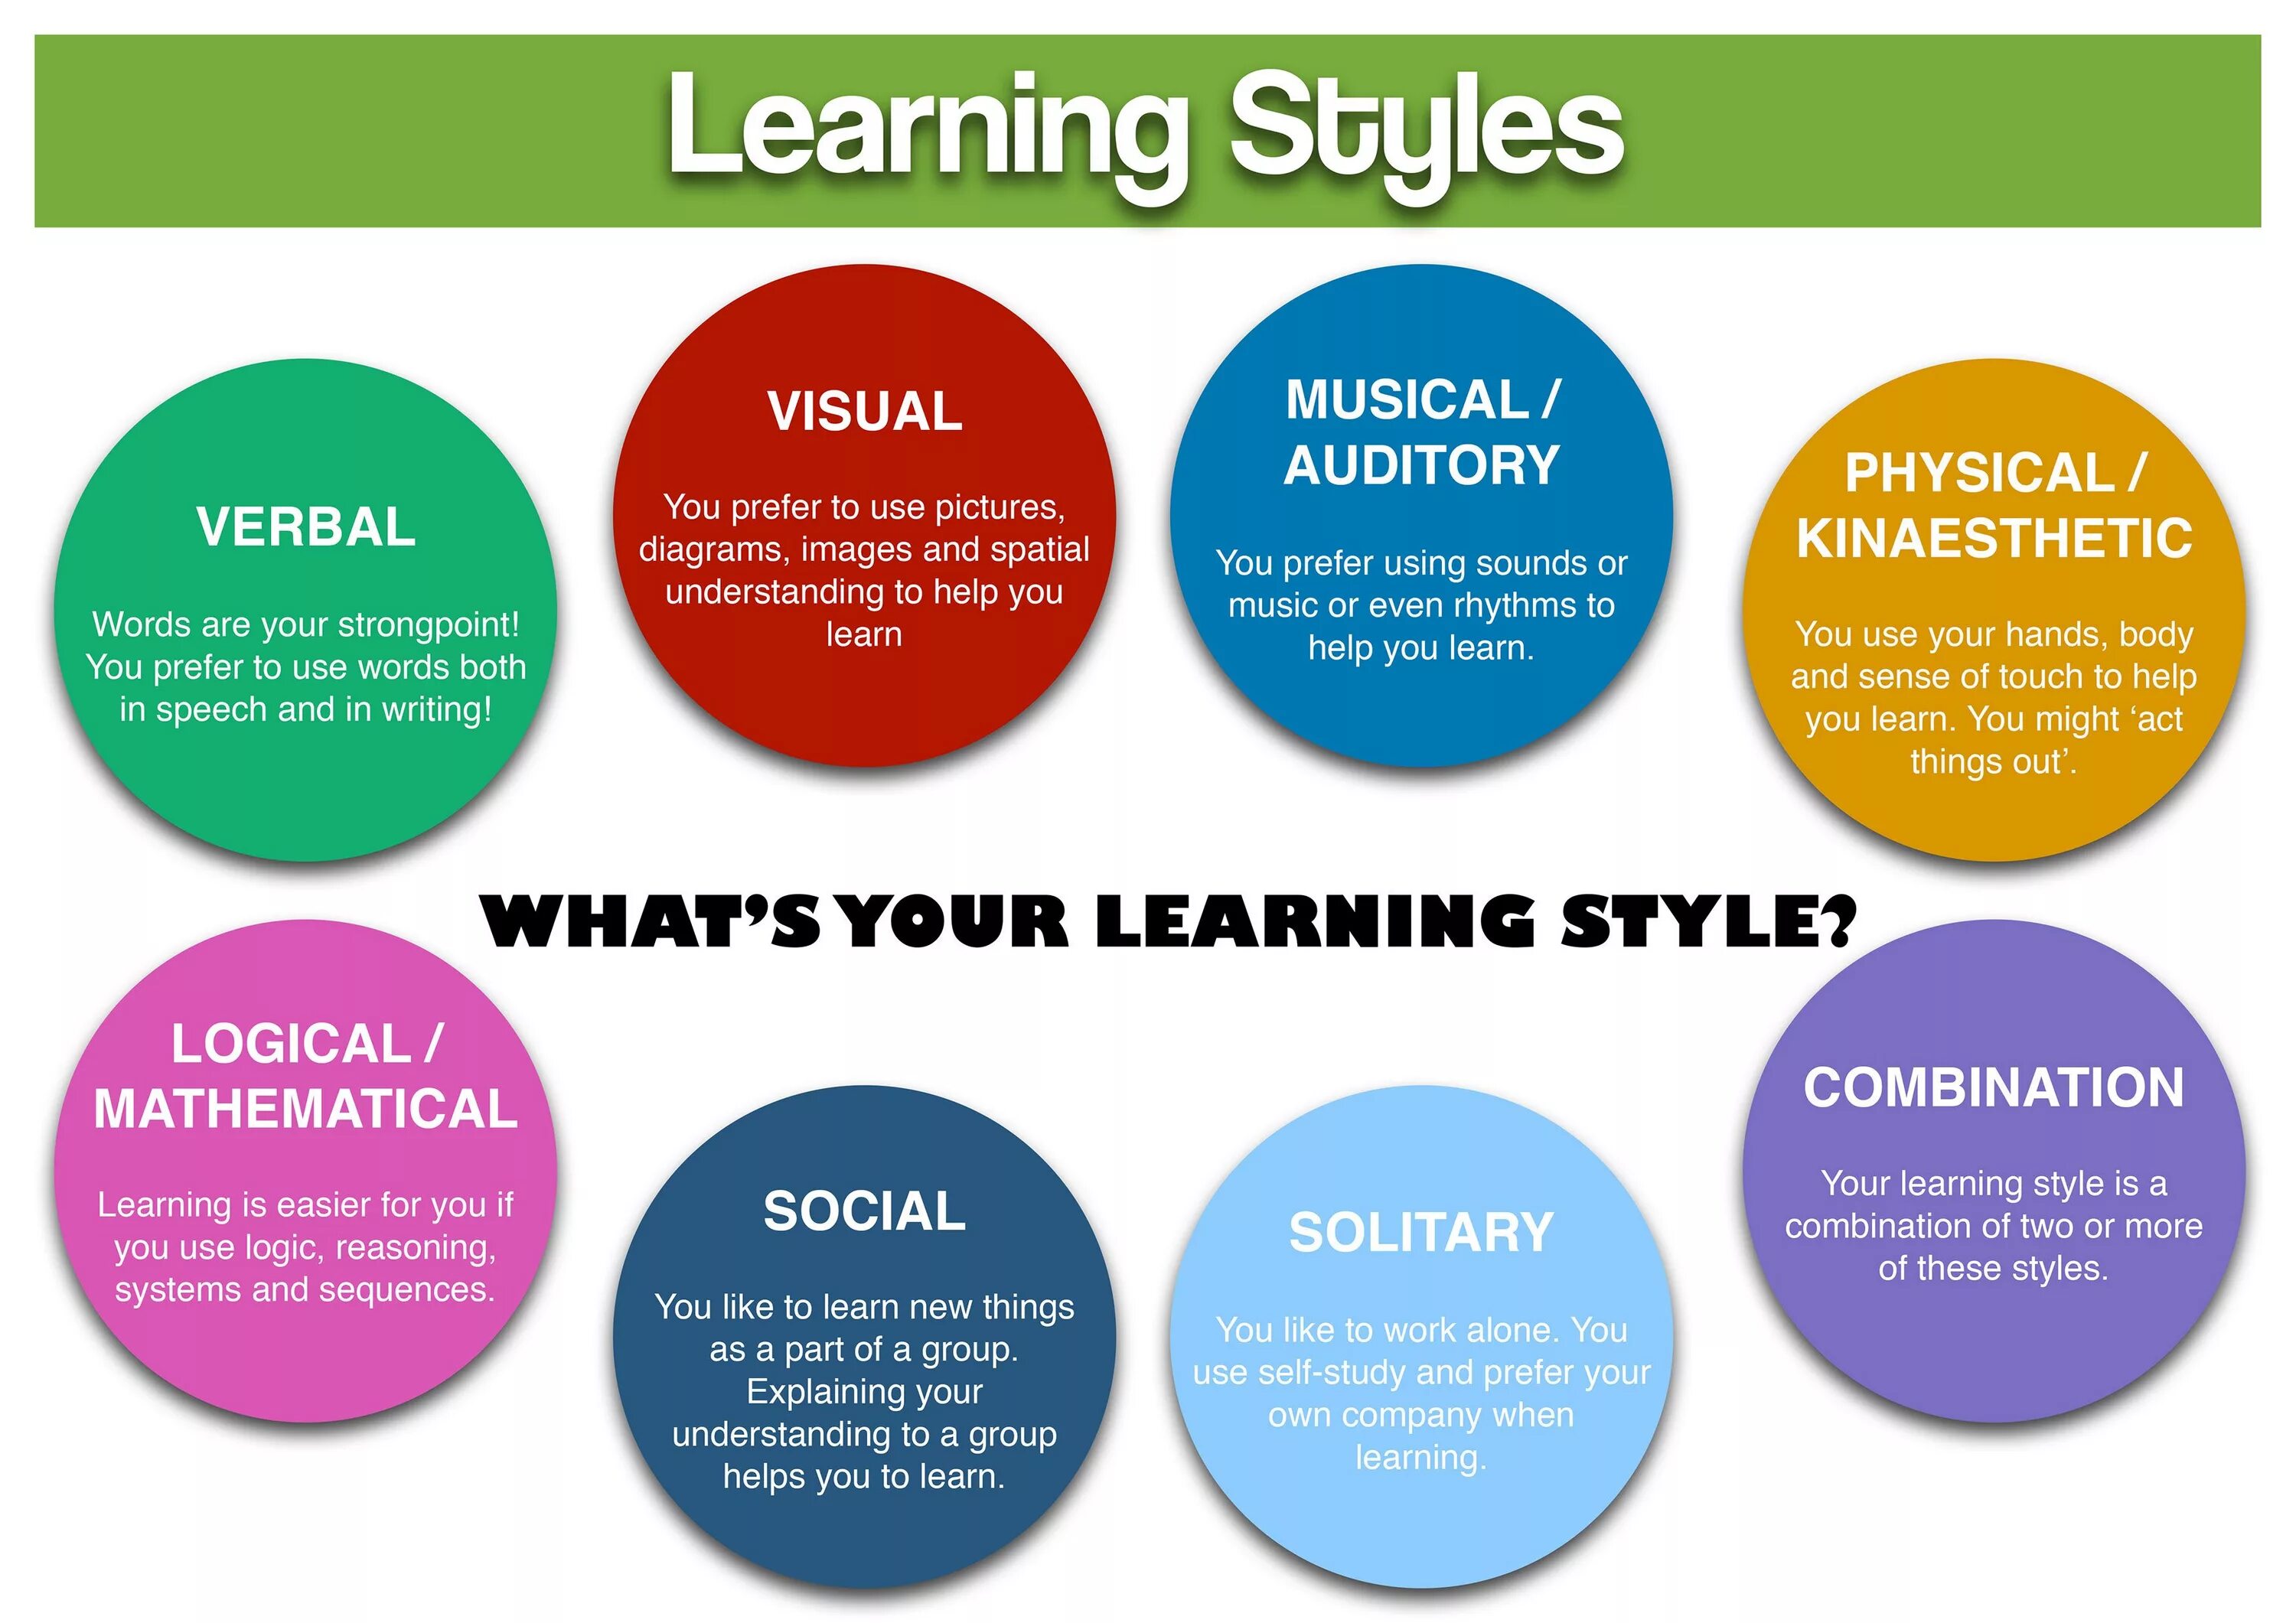 Kinds of education. Learning Styles. Types of Learning Styles. Different Learning Styles. Learning Styles and Strategies.